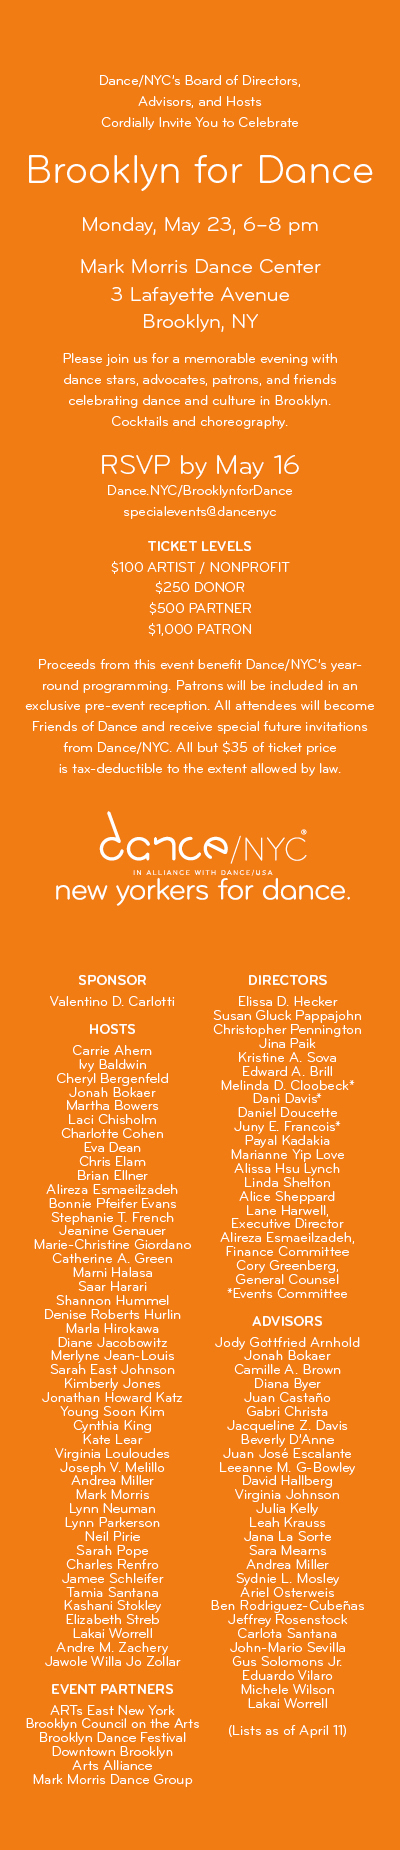 DanceNYC-Invite-May23-Emailable.jpg